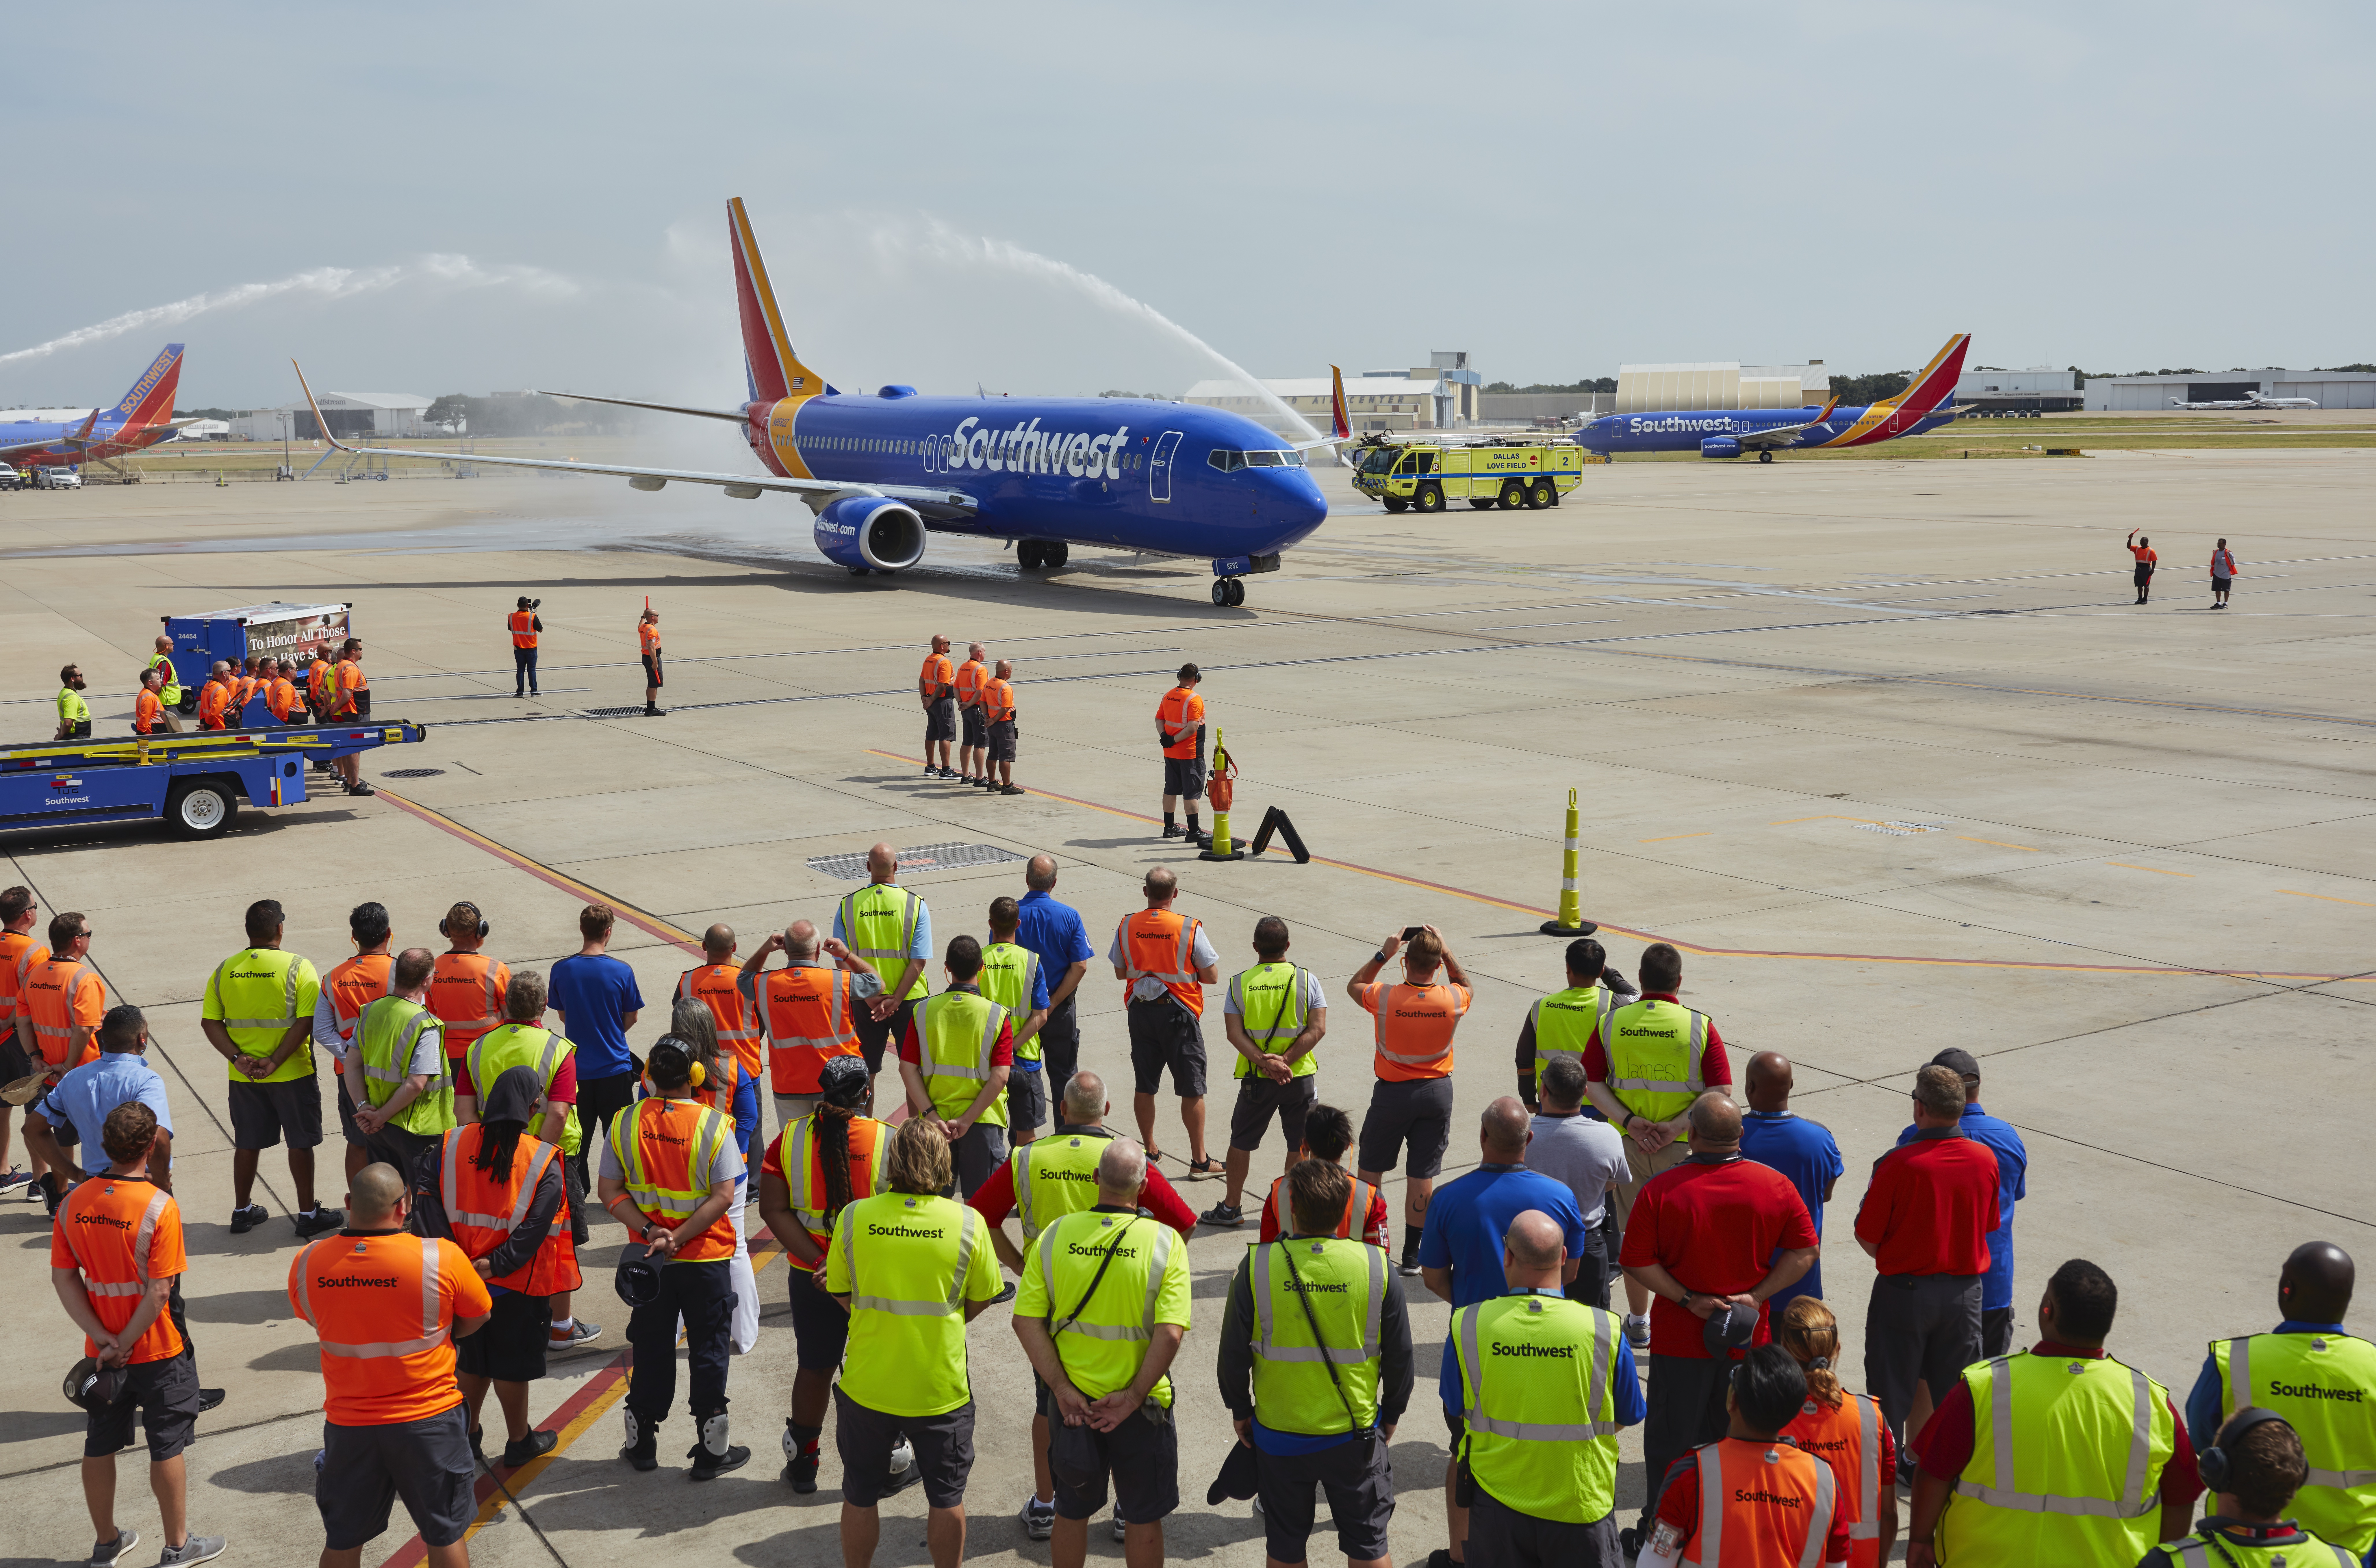 Southwest Airlines Captain Bryan Knight flies his father back home to Dallas Love Field for the final time more than 50 years after he was killed in action during the Vietnam War in 1967. (Credit: Rich Matthews/Southwest Airlines)